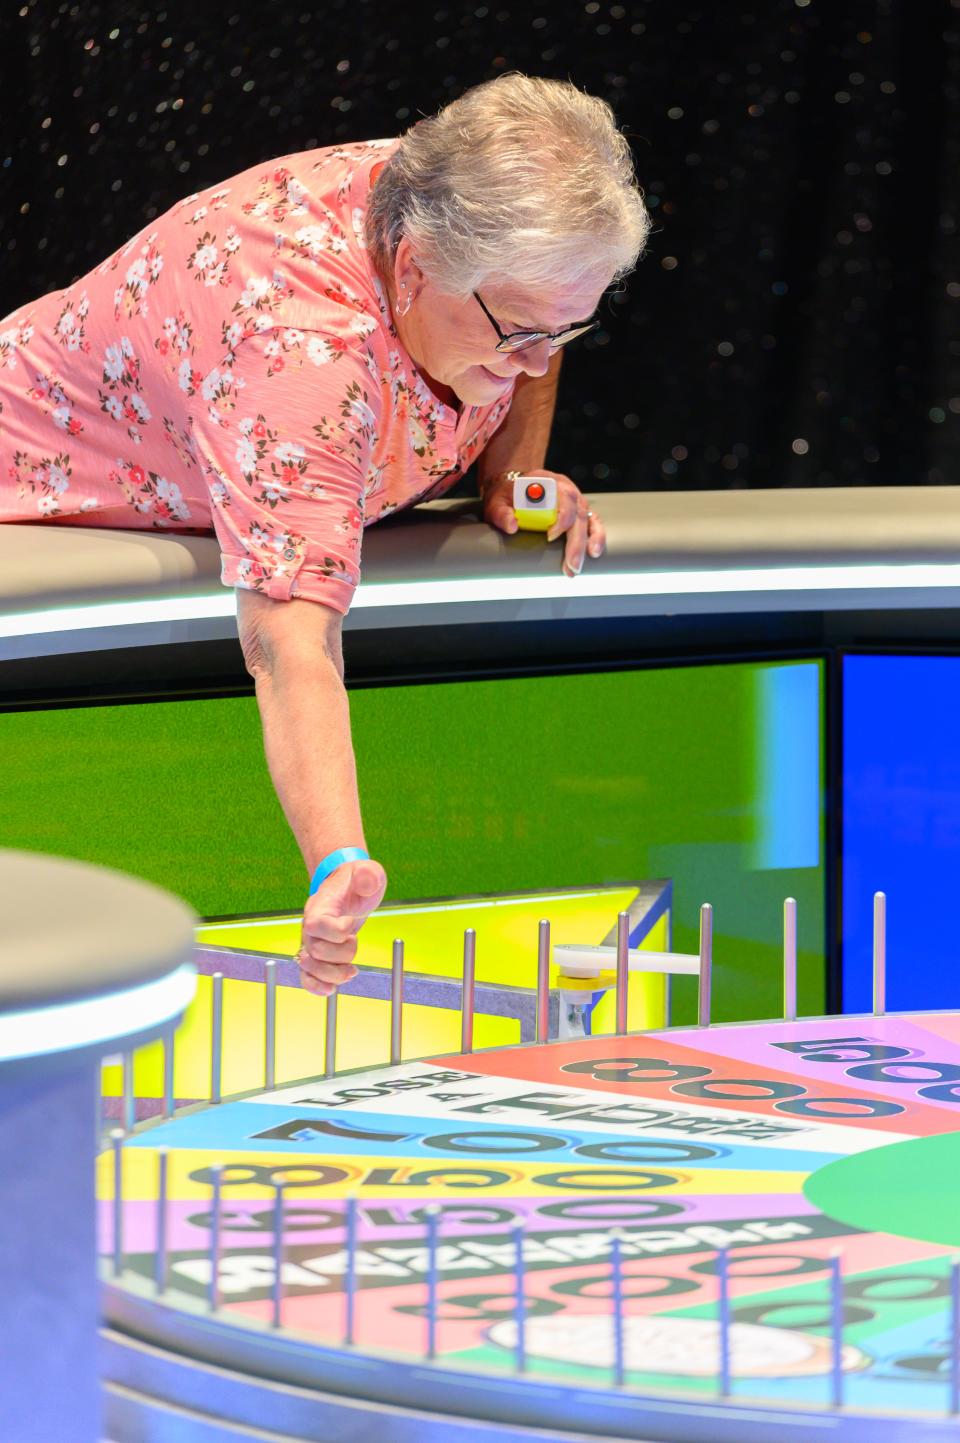 Wheel of Fortune Live! will let audience members play the TV game show at Fort Myers' Barbara B. Mann Performing Arts Hall.